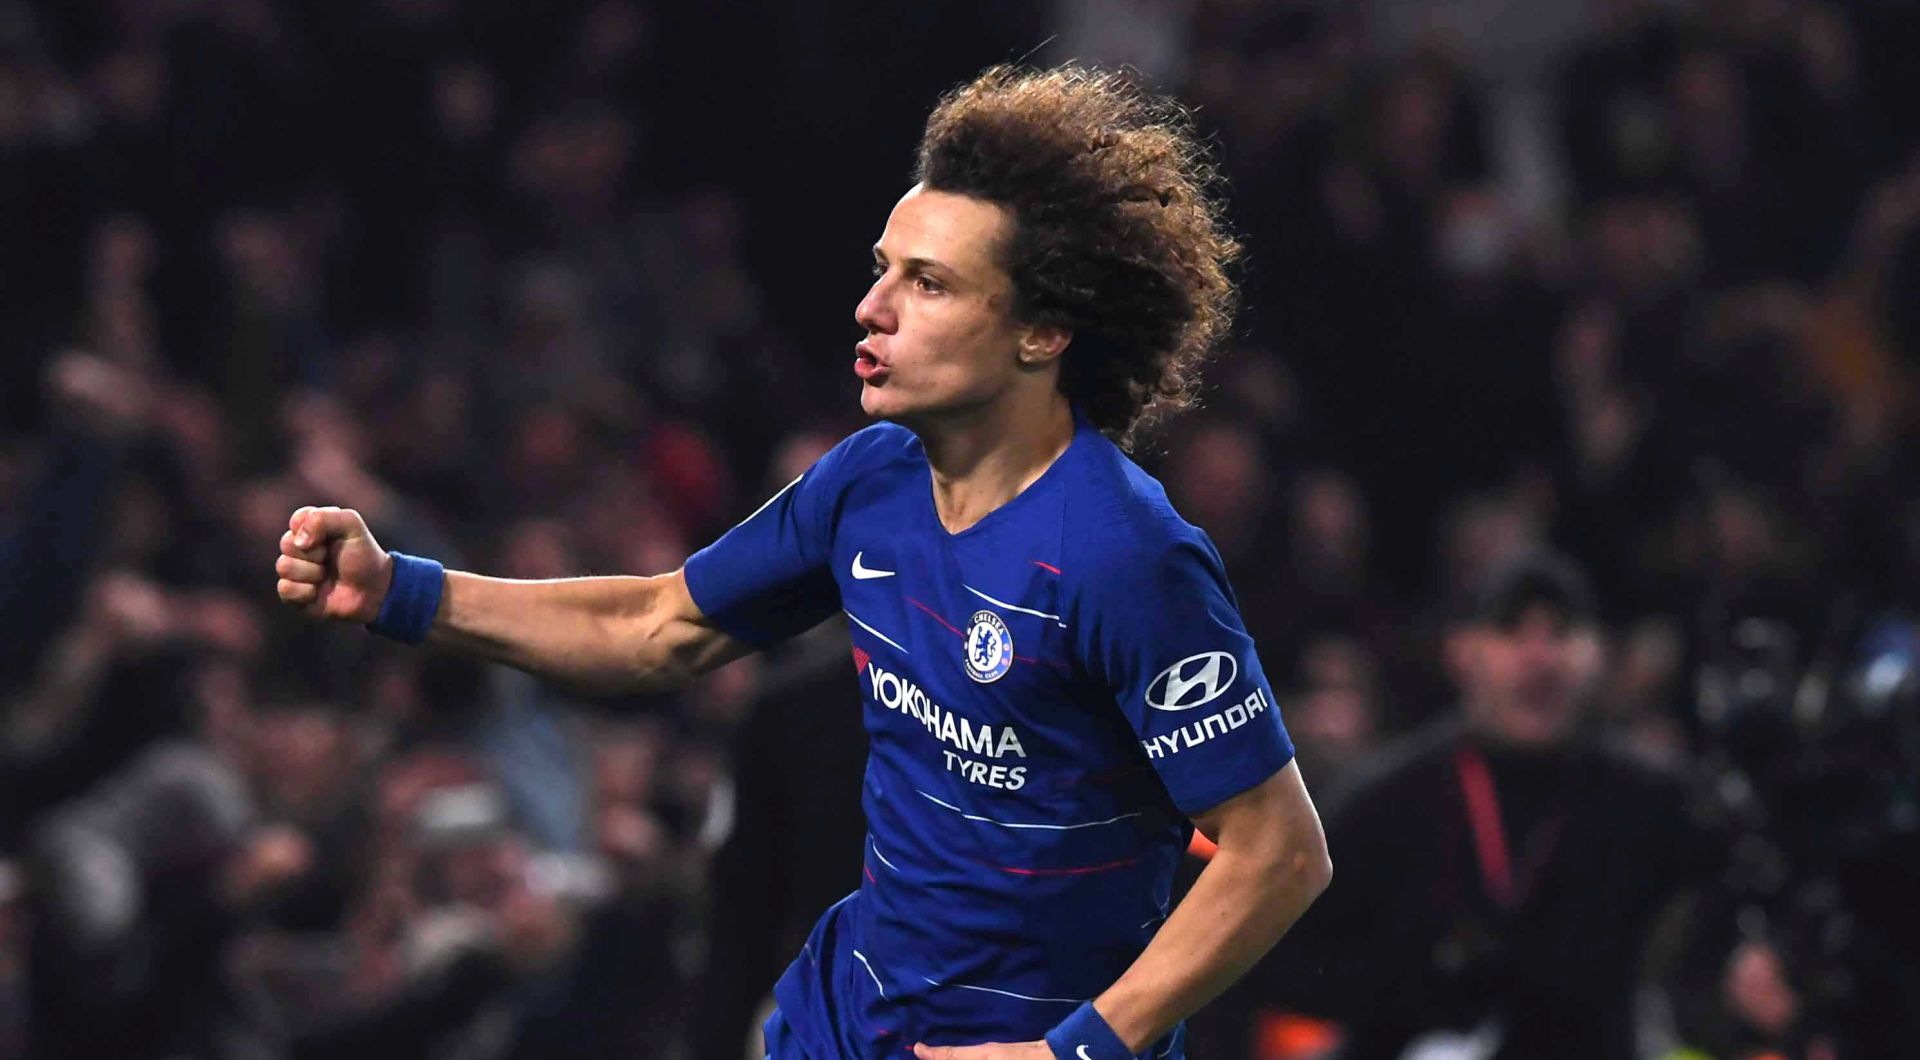 epa07761743 (FILE) - Chelsea David Luiz celebrates scoring the winning penalty during the Carabao League Cup semi final second leg soccer match between Chelsea and Tottenham Hotspur at Stamford Bridge stadium in London, Britain, 24 January 2019 (re-issued 08 August 2019). Arsenal London are said to have agreed a deal to sign David Luiz from Chelsea for a fee of around £8 million (€8,67 million) and get it through on the Premier League transfer deadline day 08 August 2019.  EPA/NEIL HALL EDITORIAL USE ONLY.  No use with unauthorized audio, video, data, fixture lists, club/league logos or 'live' services. Online in-match use limited to 120 images, no video emulation. No use in betting, games or single club/league/player publications. *** Local Caption *** 54930509